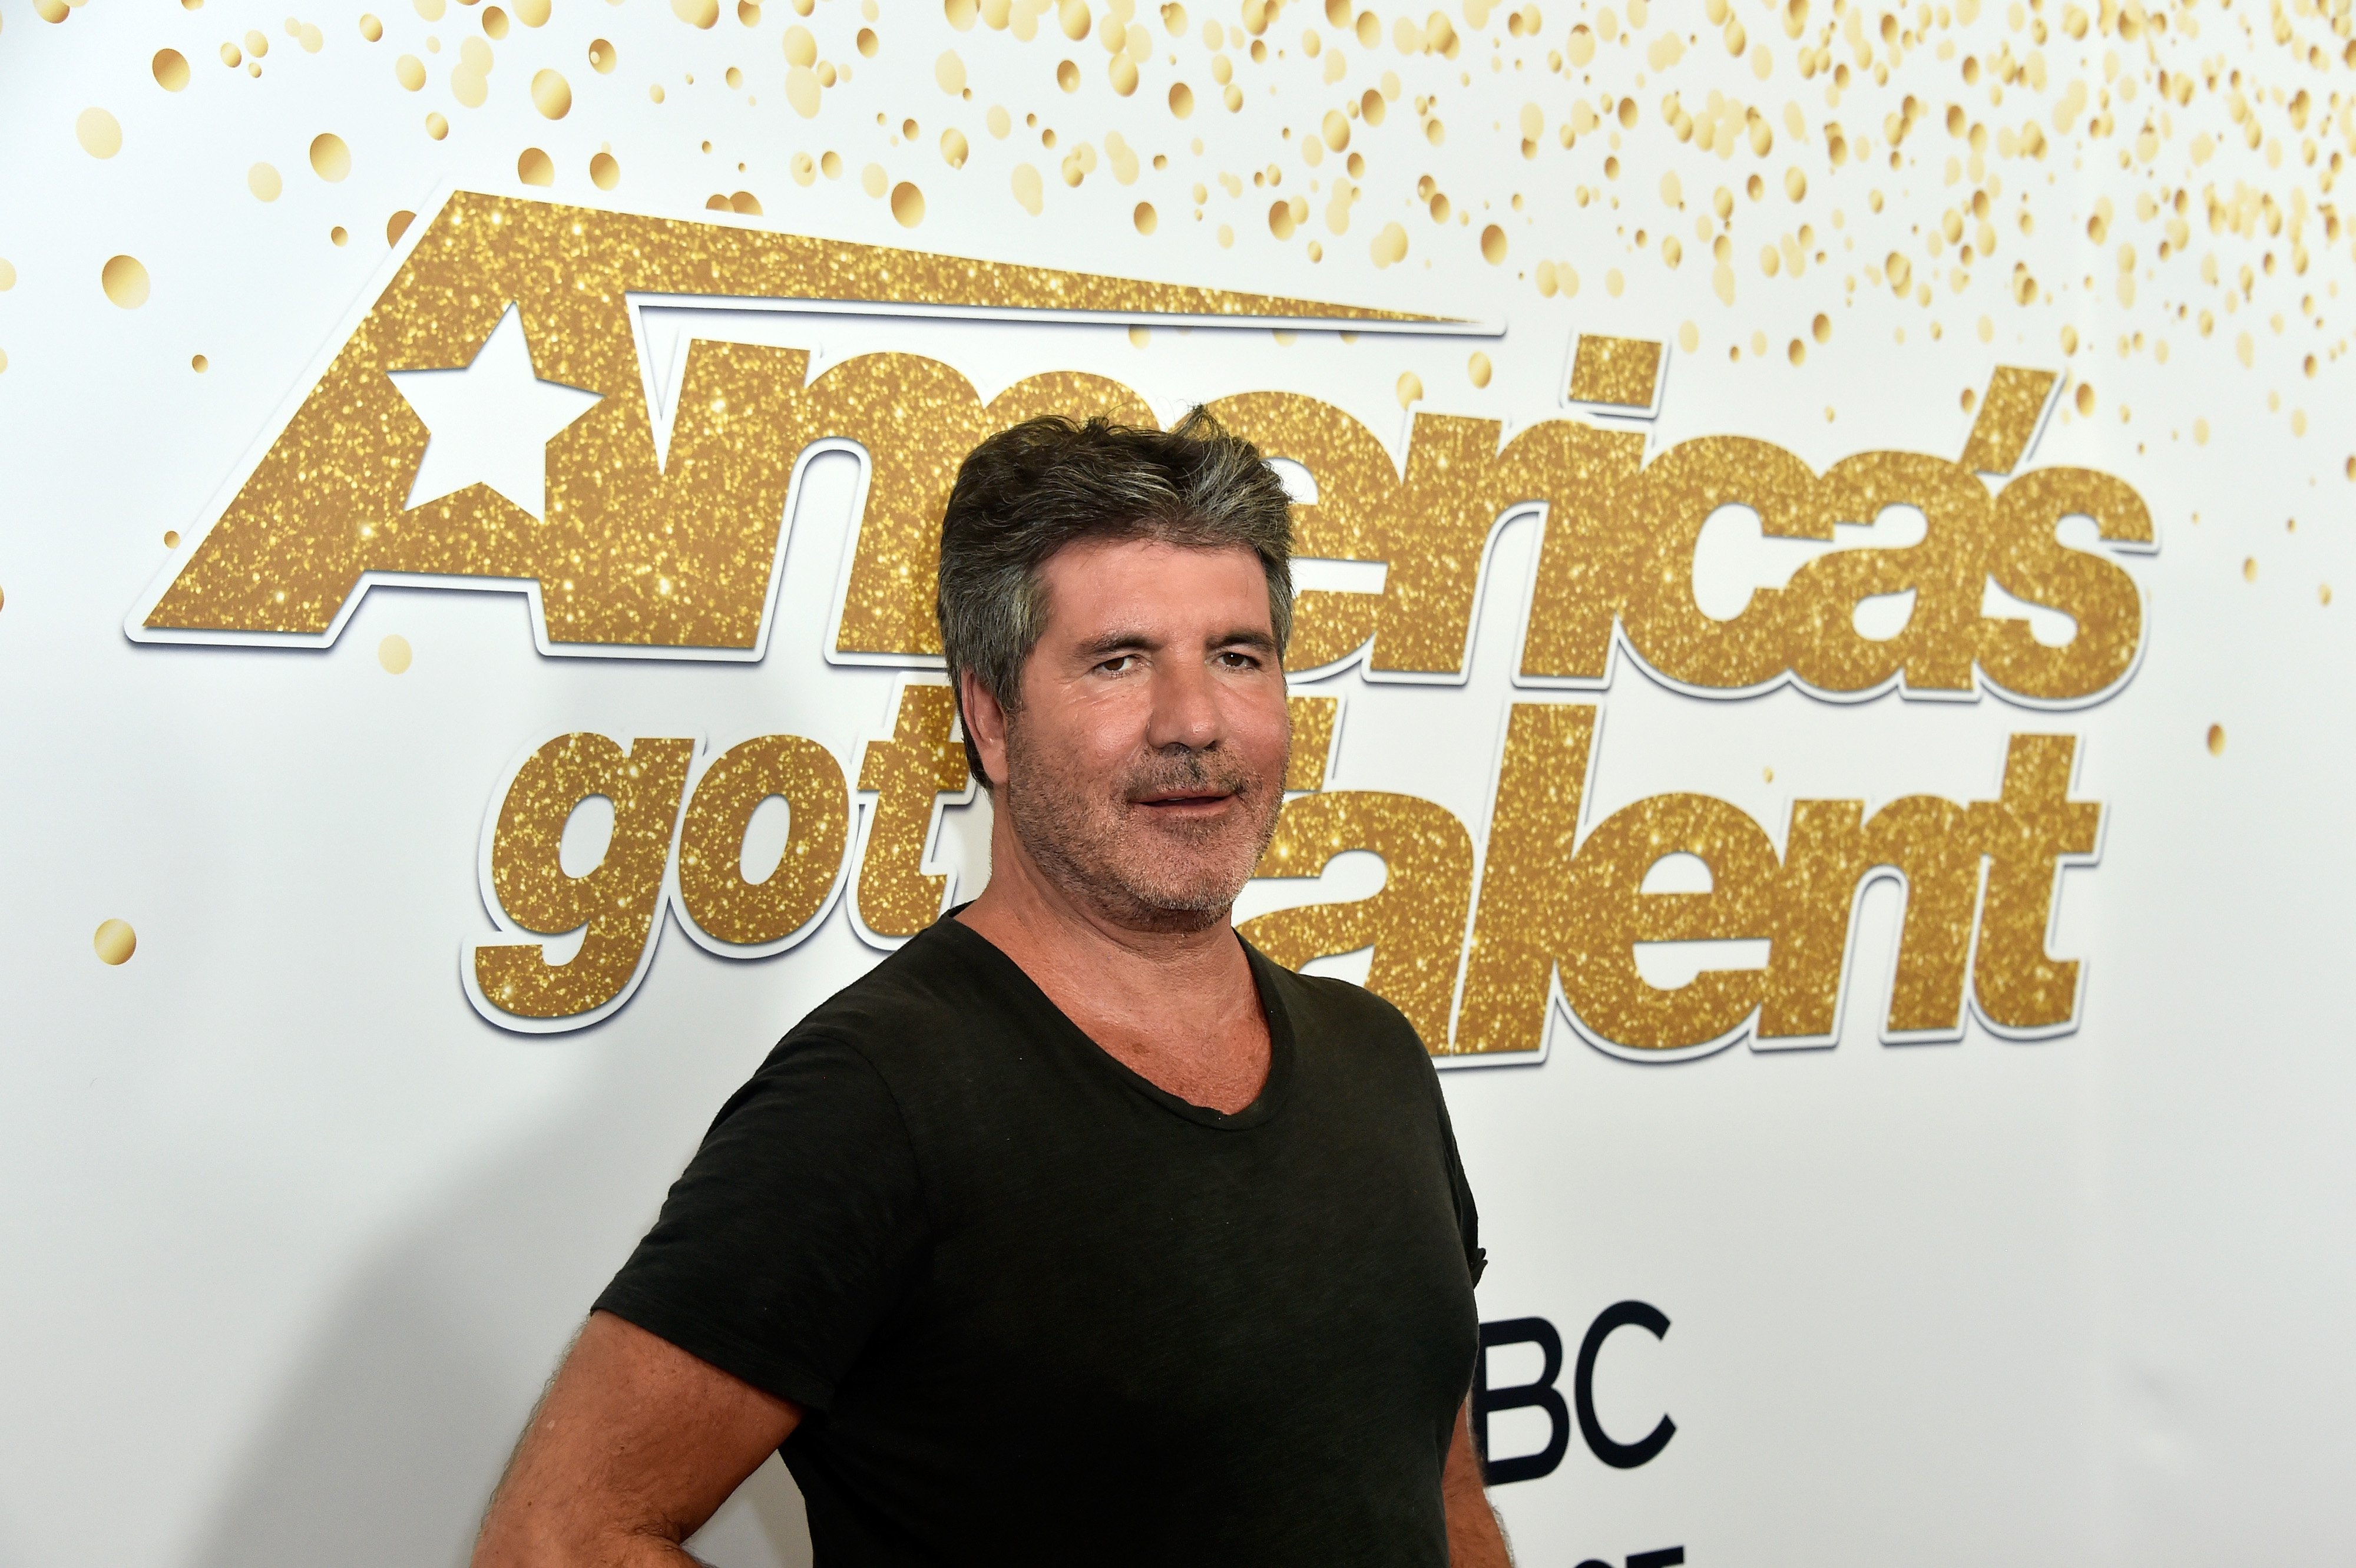 Simon Cowell at Dolby Theatre on August 14, 2018 | Photo: Getty Images